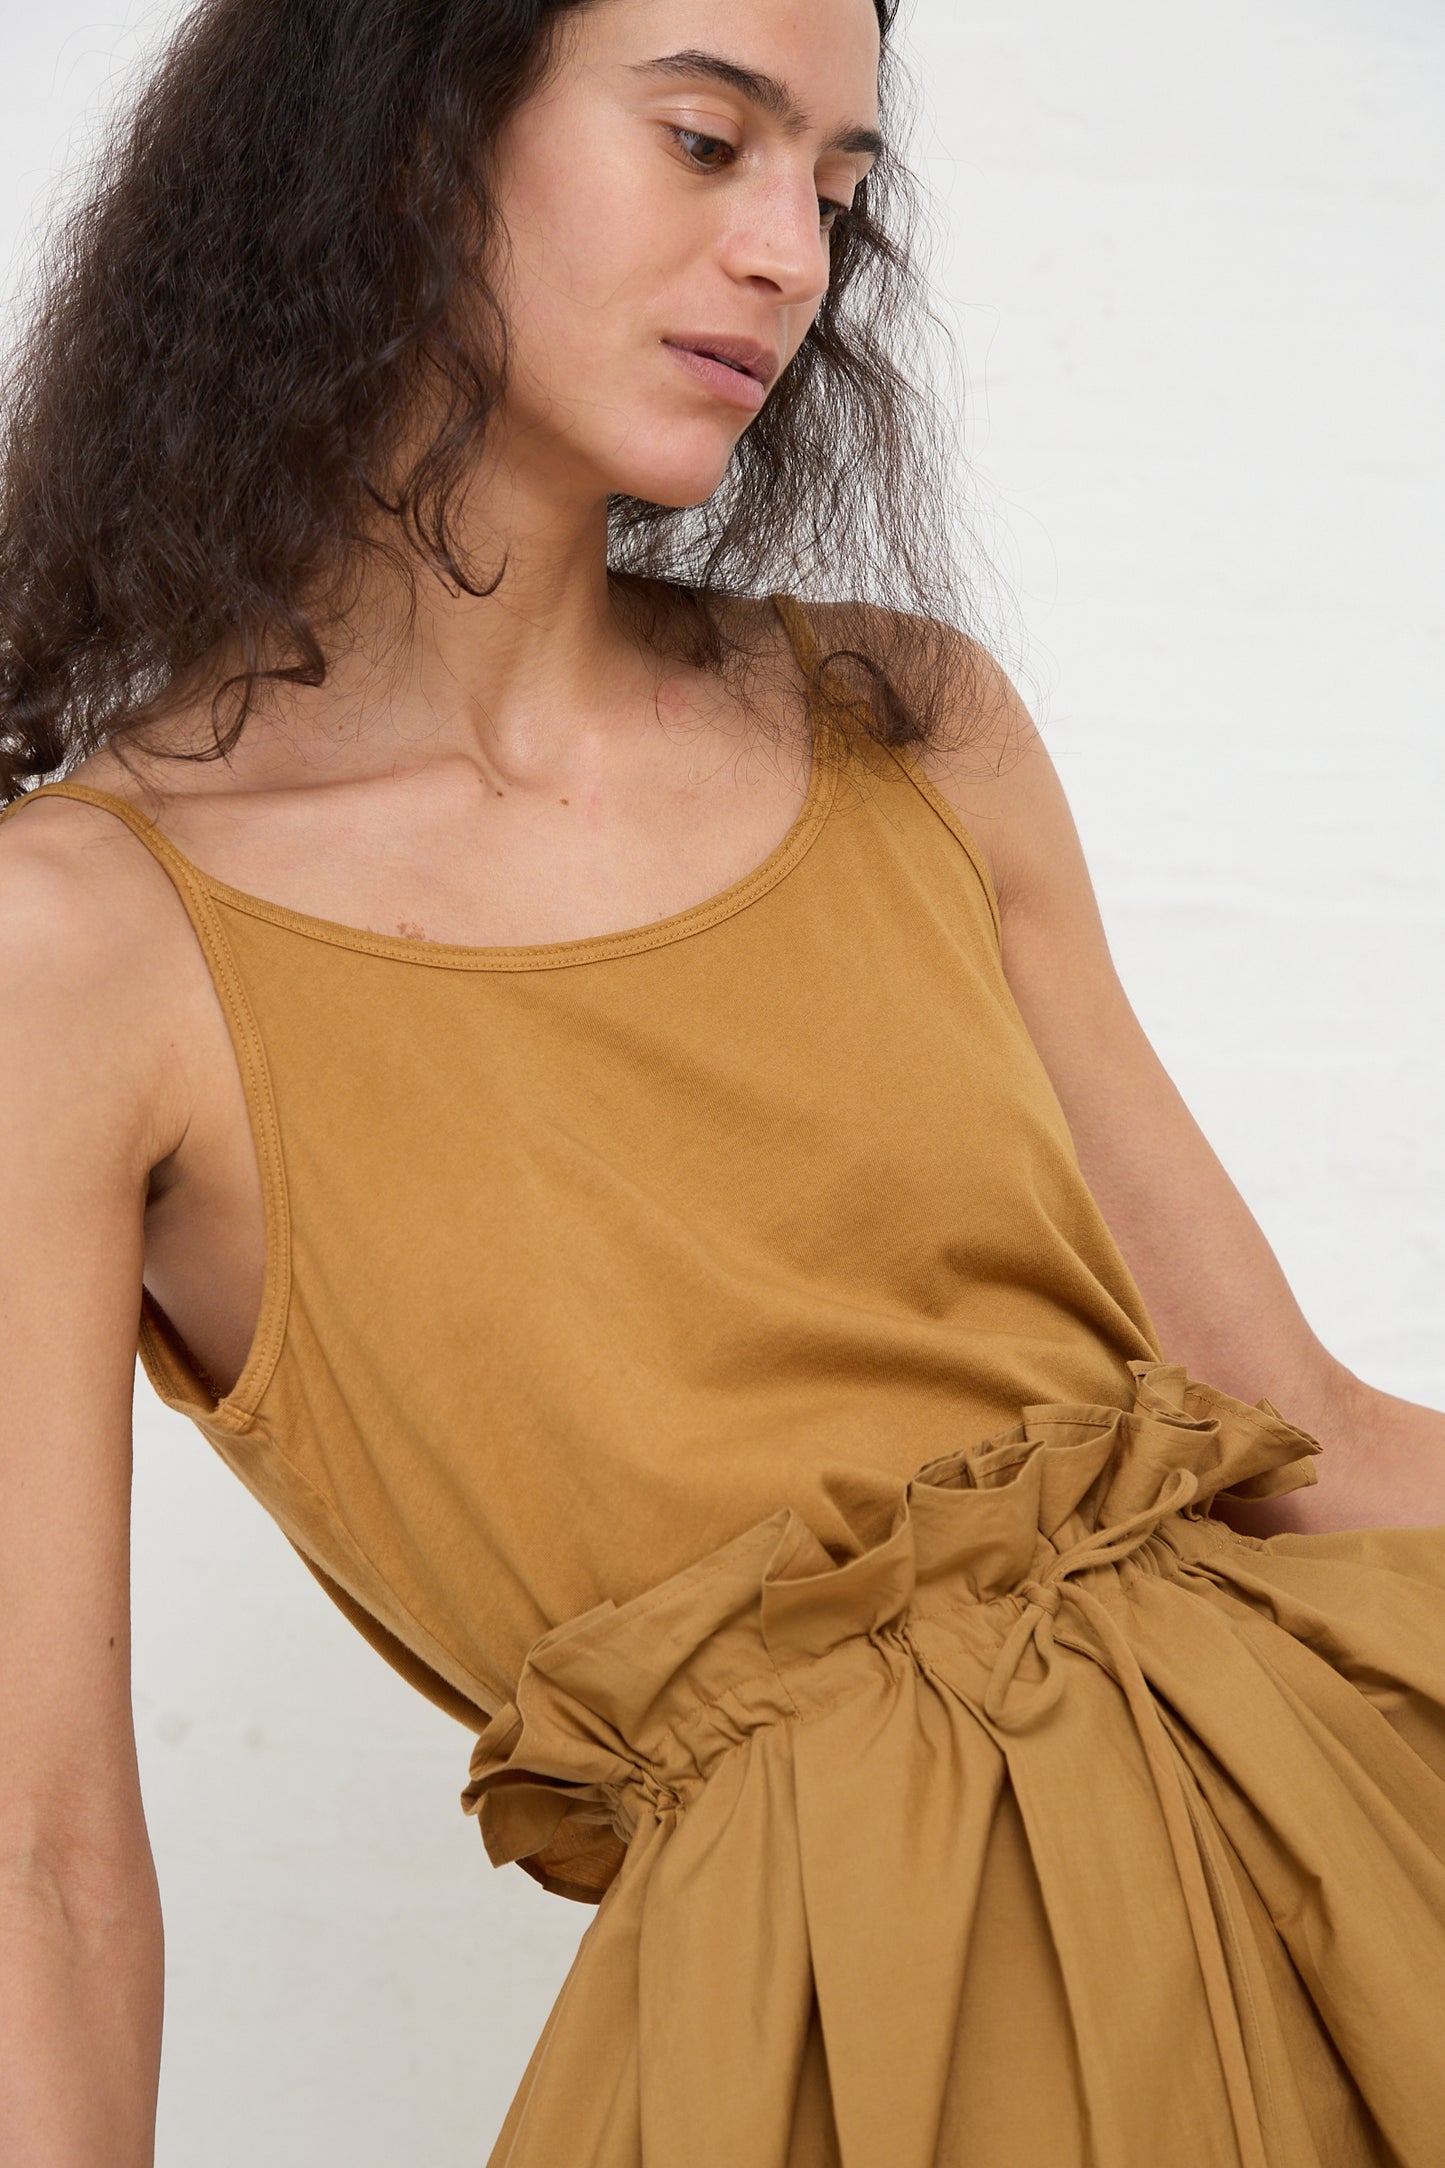 A woman in a Cotton Jersey Camisole in Camel by Black Crane holding a gathered piece of matching fabric.